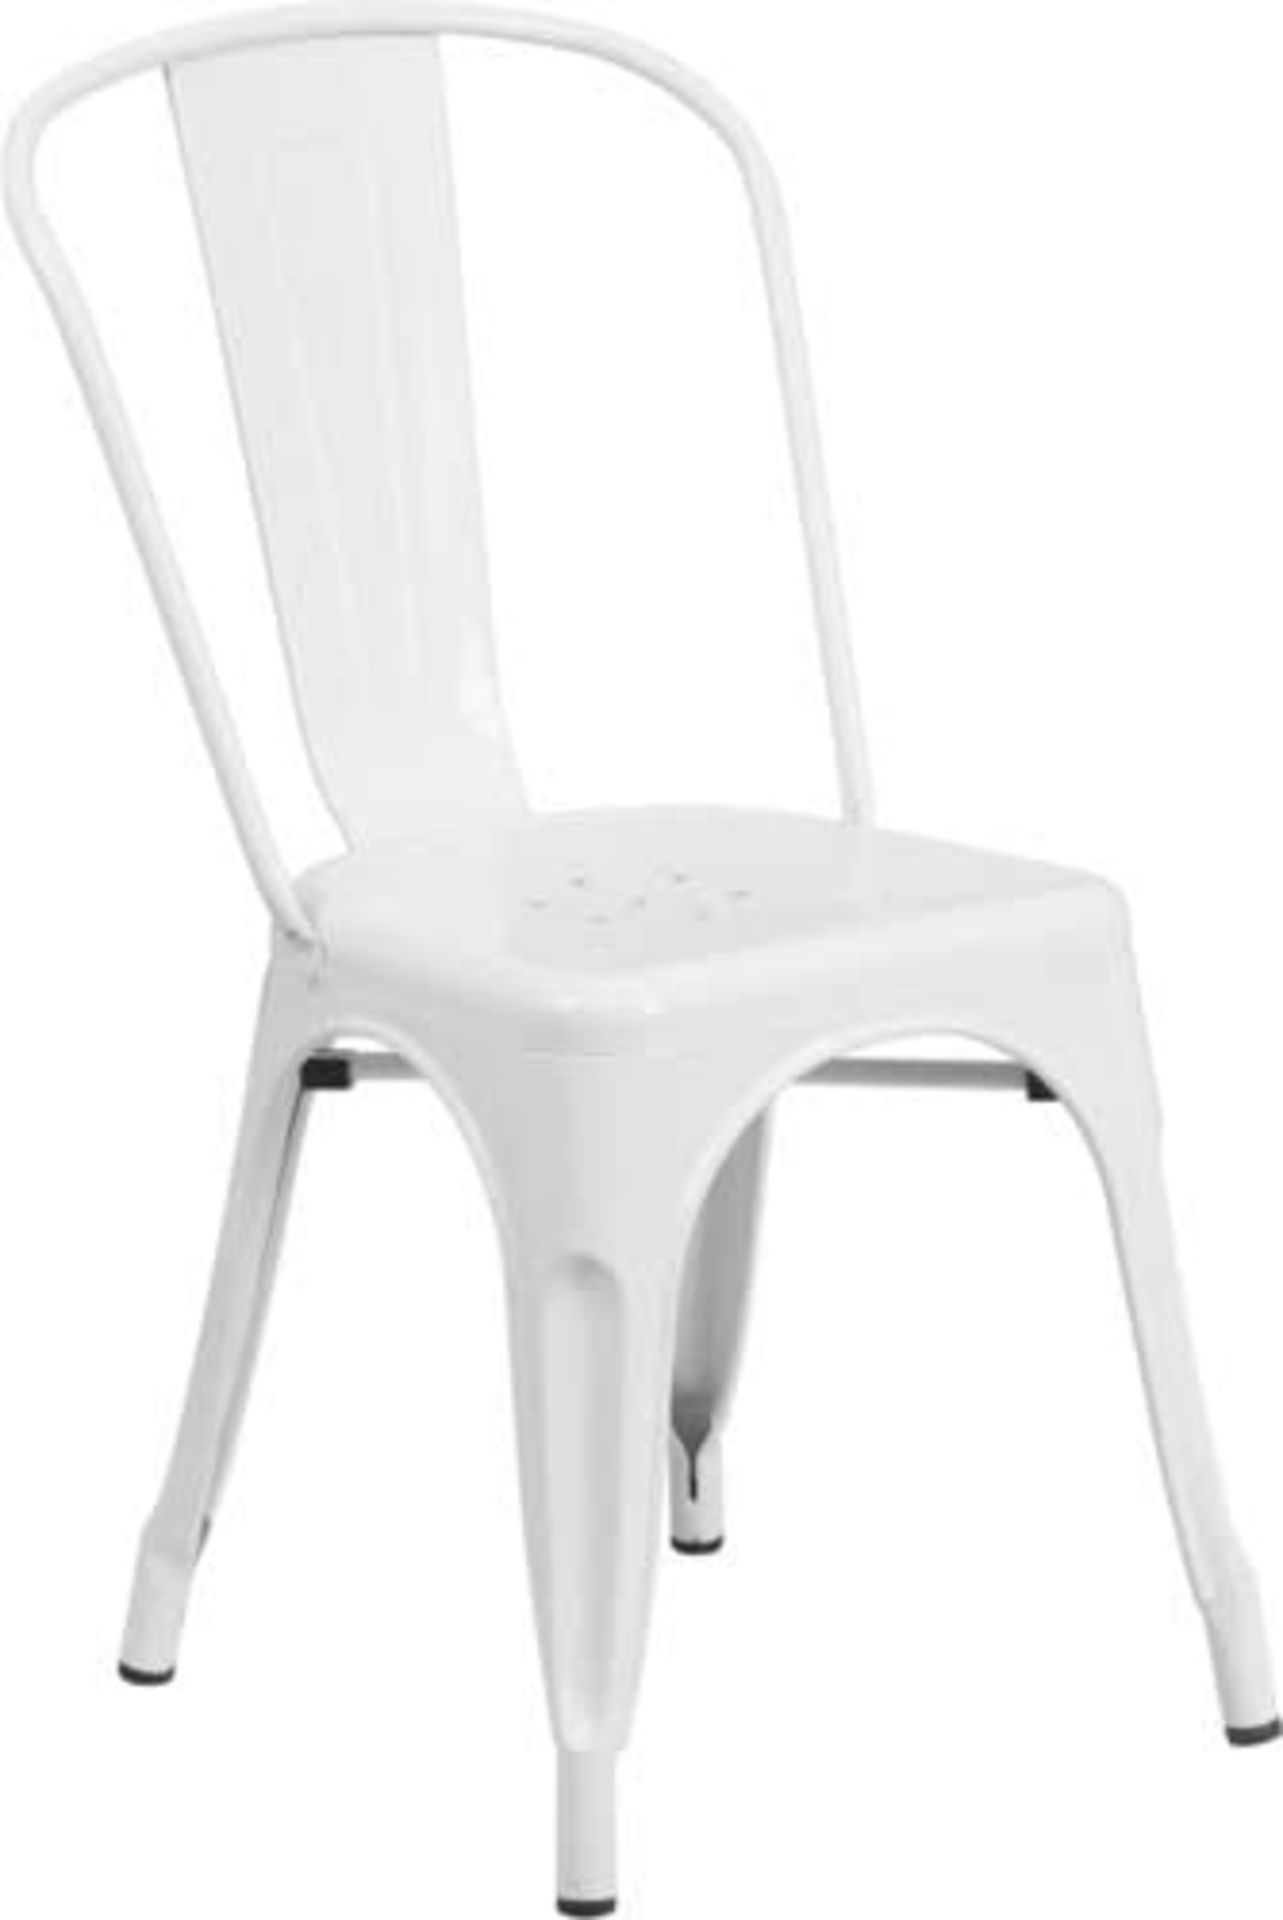 1 x Tolix Industrial Style Outdoor Bistro Table and Chair Set in White- Includes 1 x Table and 4 x - Image 4 of 12